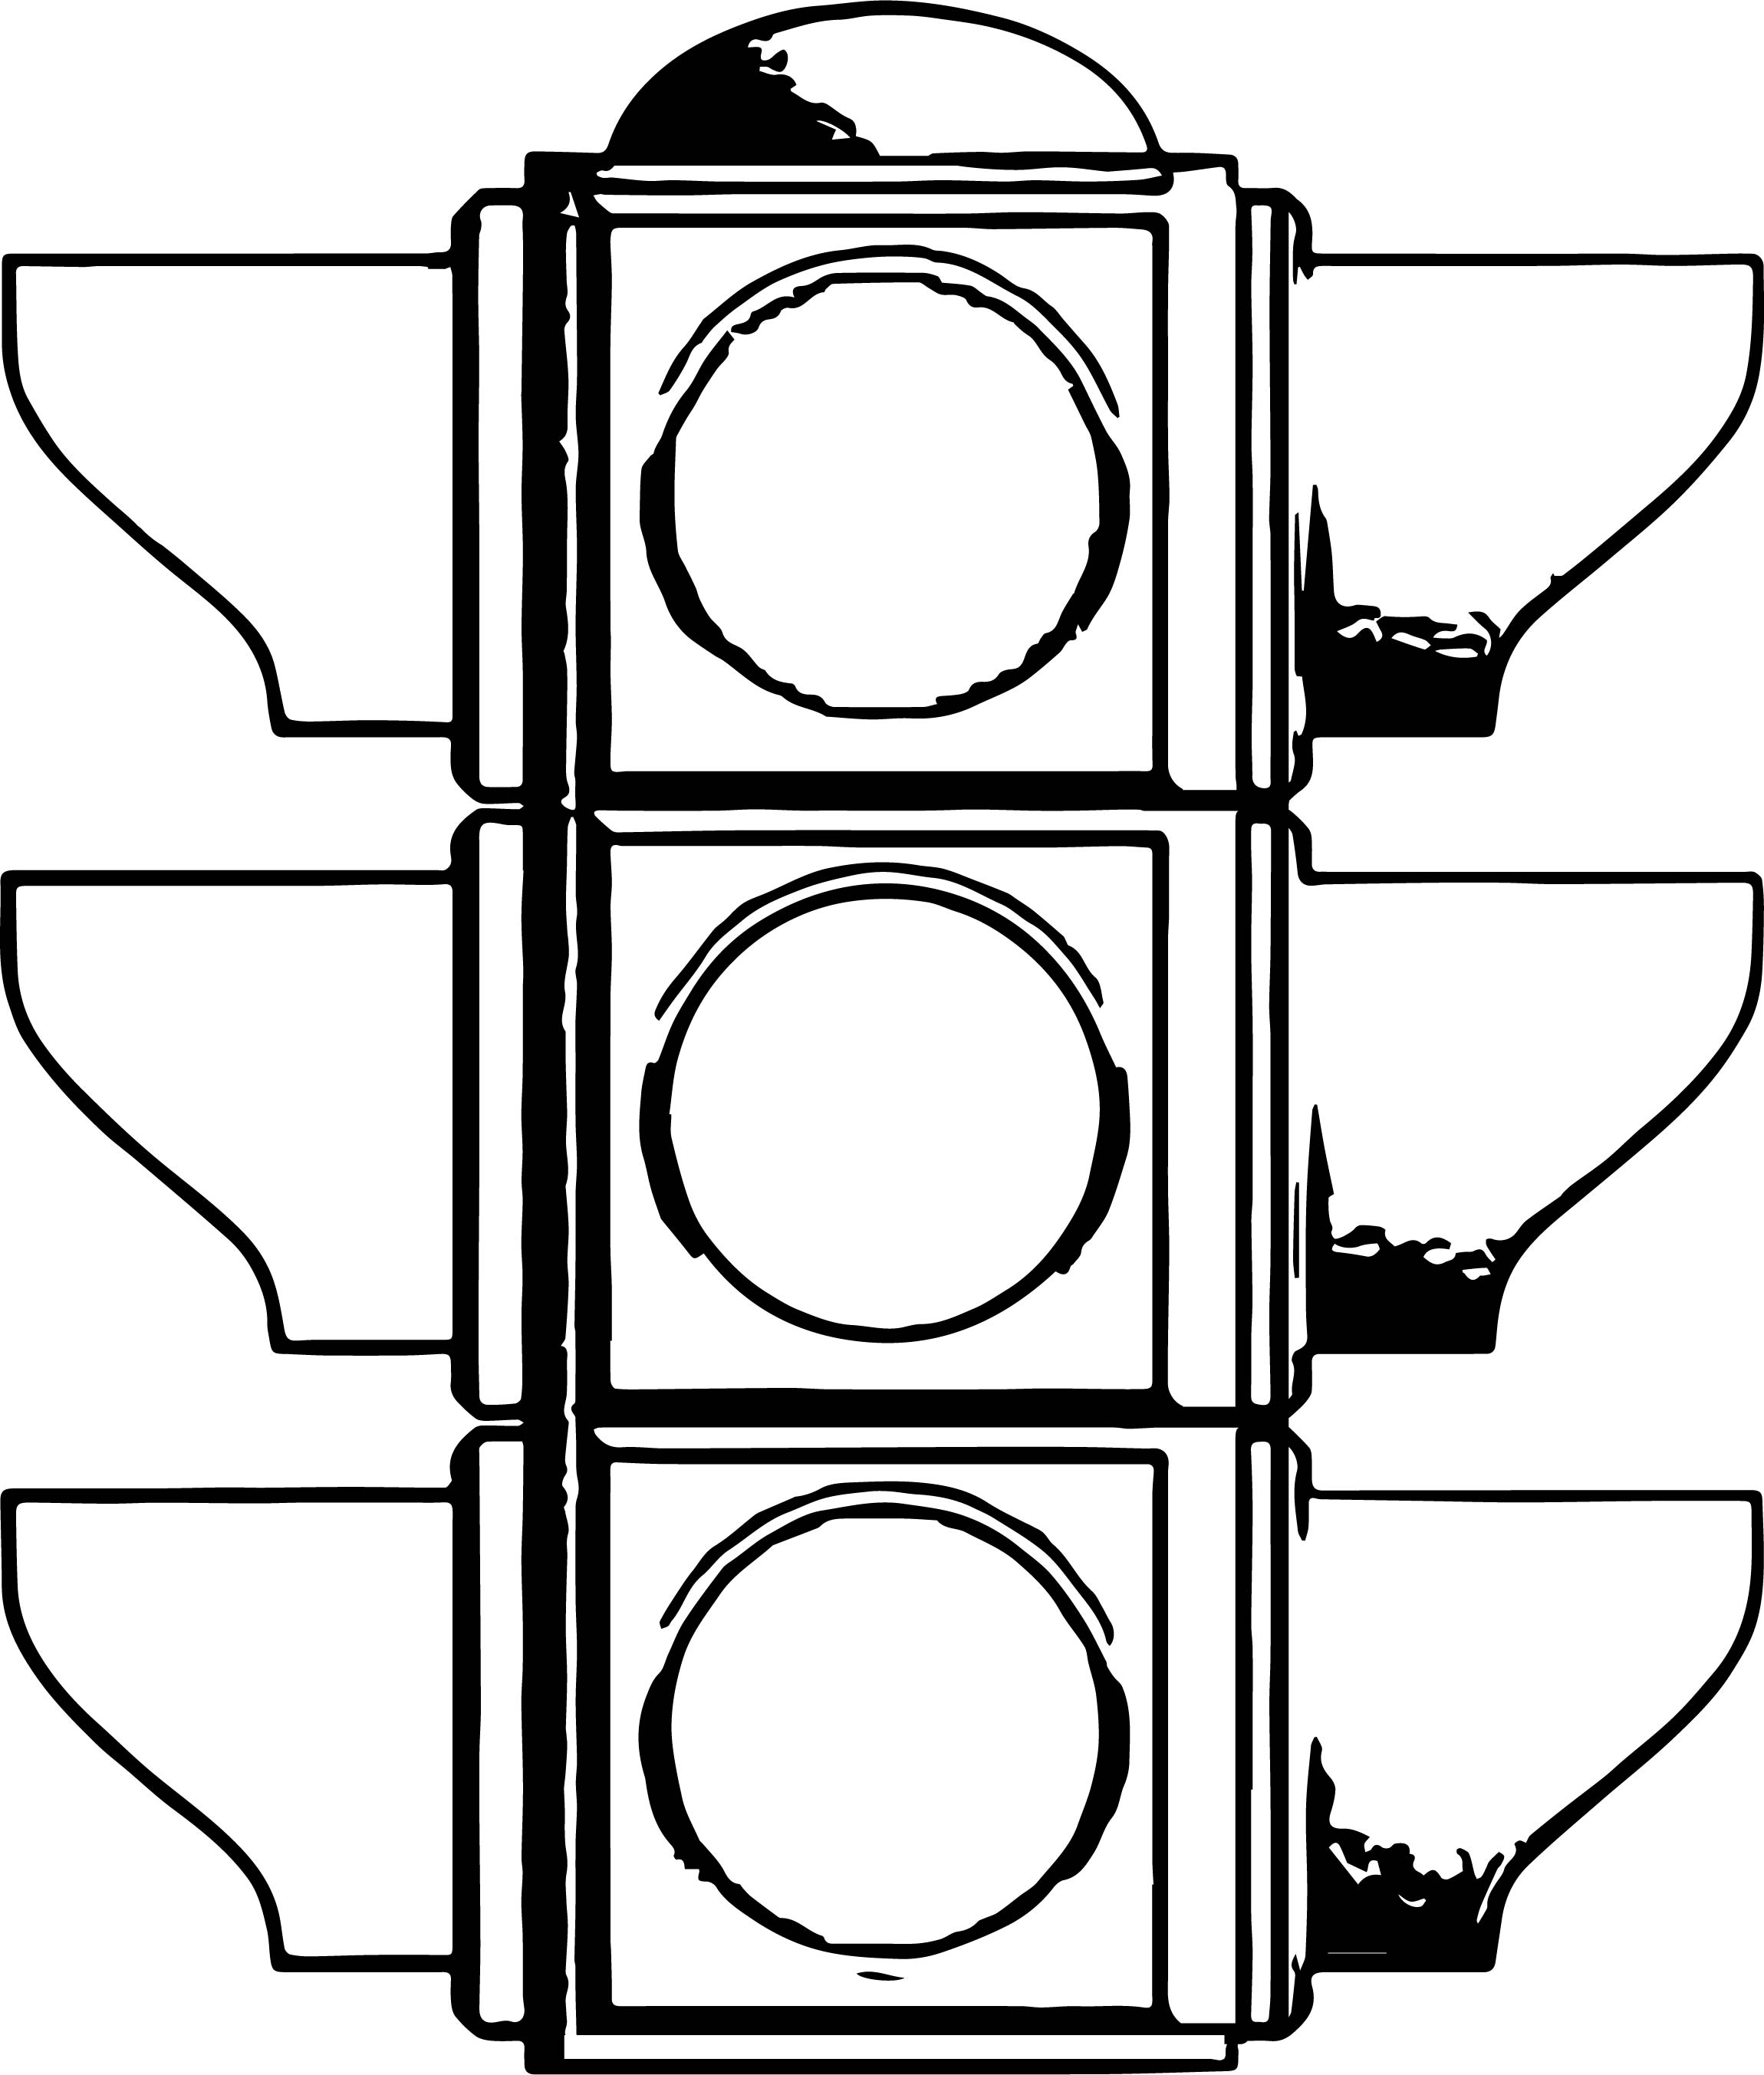 Traffic Light All Coloring Page Wecoloringpage